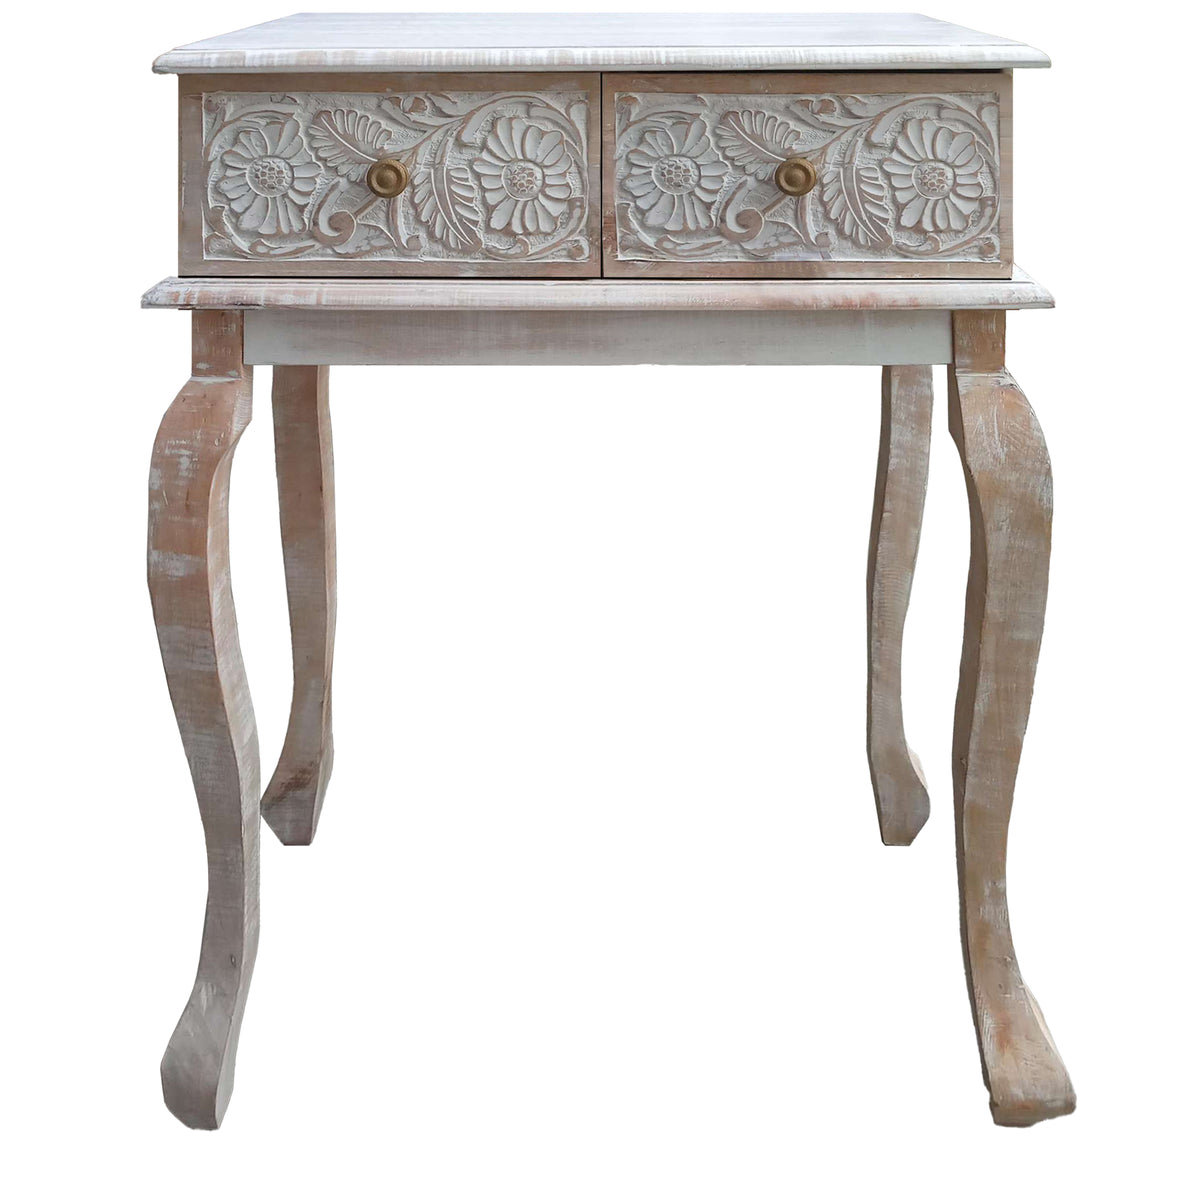 2 Drawer Mango Wood Console Table with Floral Carved Front, Brown and White - UPT-226283